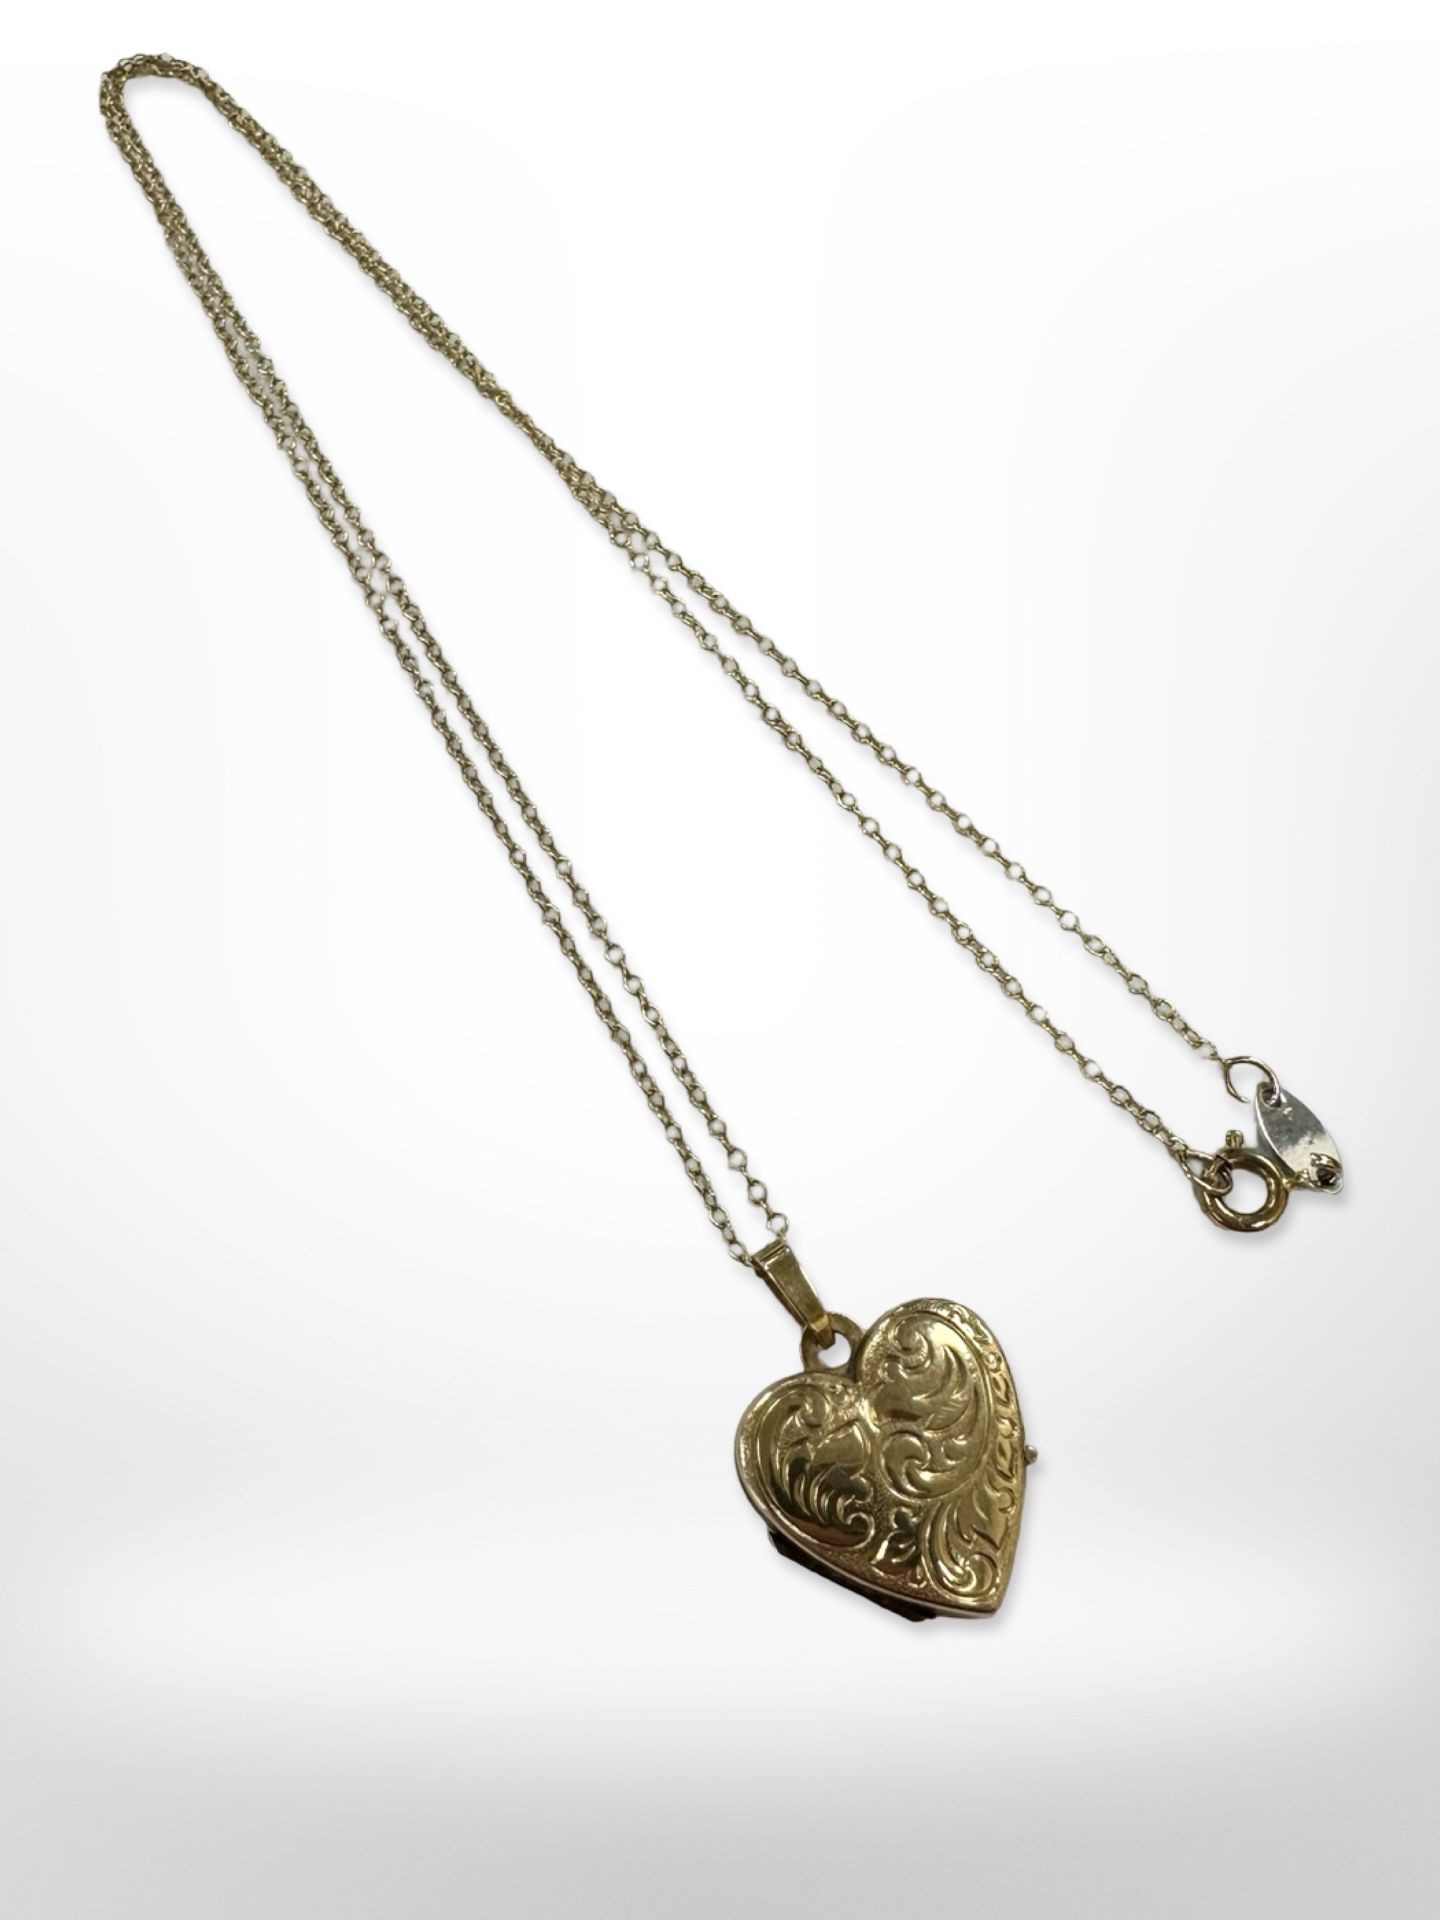 A 9ct yellow gold heart pendant suspended on a silver and gold plated chain.